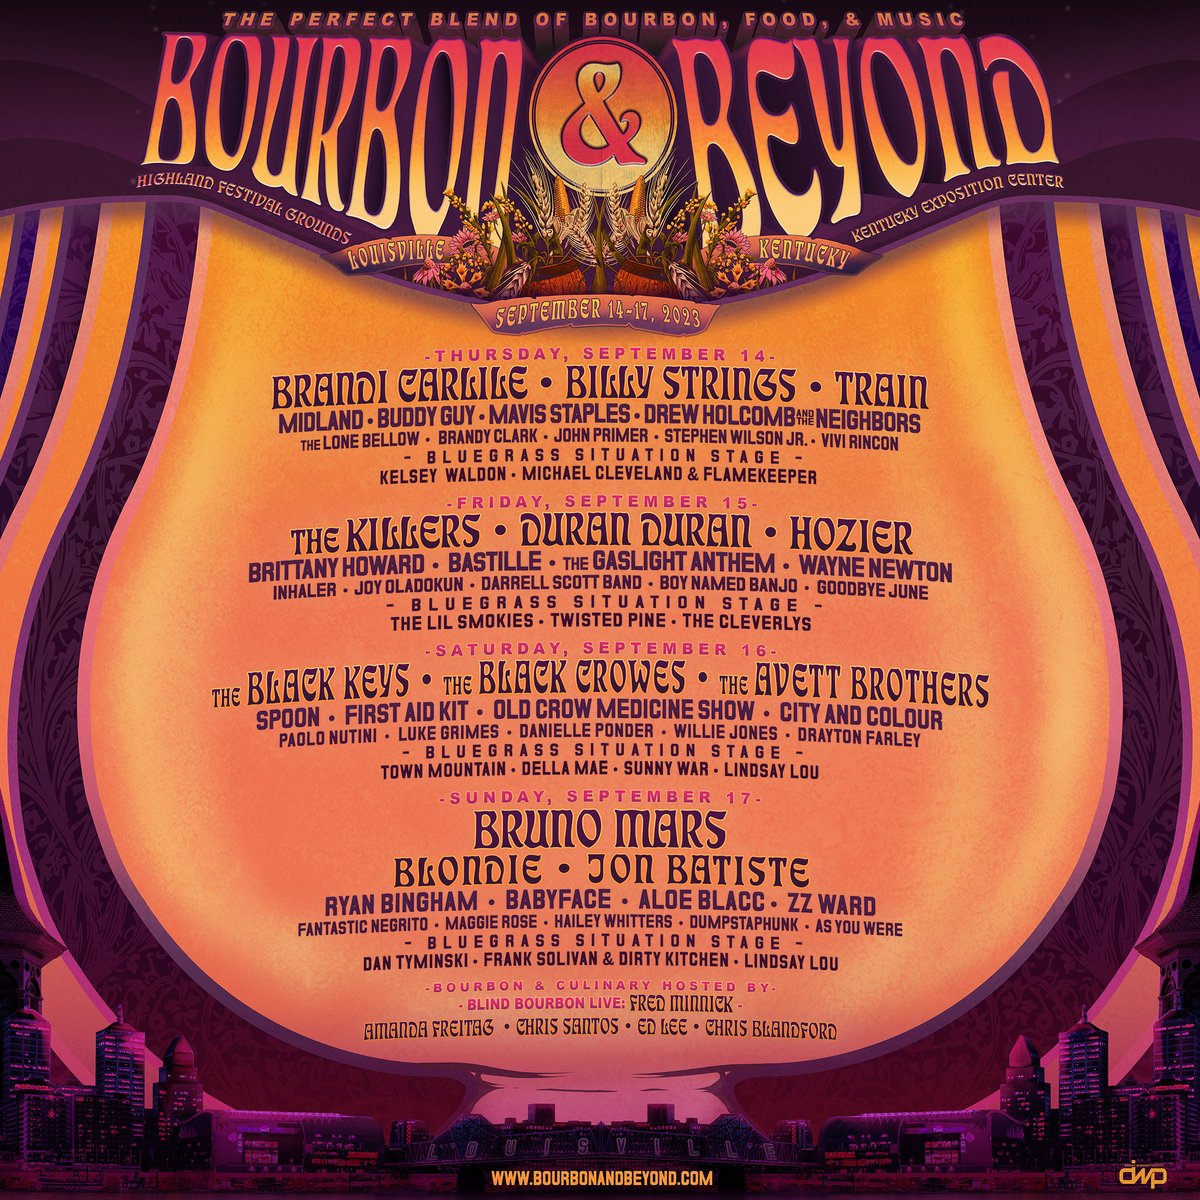 Can't wait for @BourbonNBeyond this September in Louisville! Tickets are on sale now at bit.ly/bourbon23. See you there!